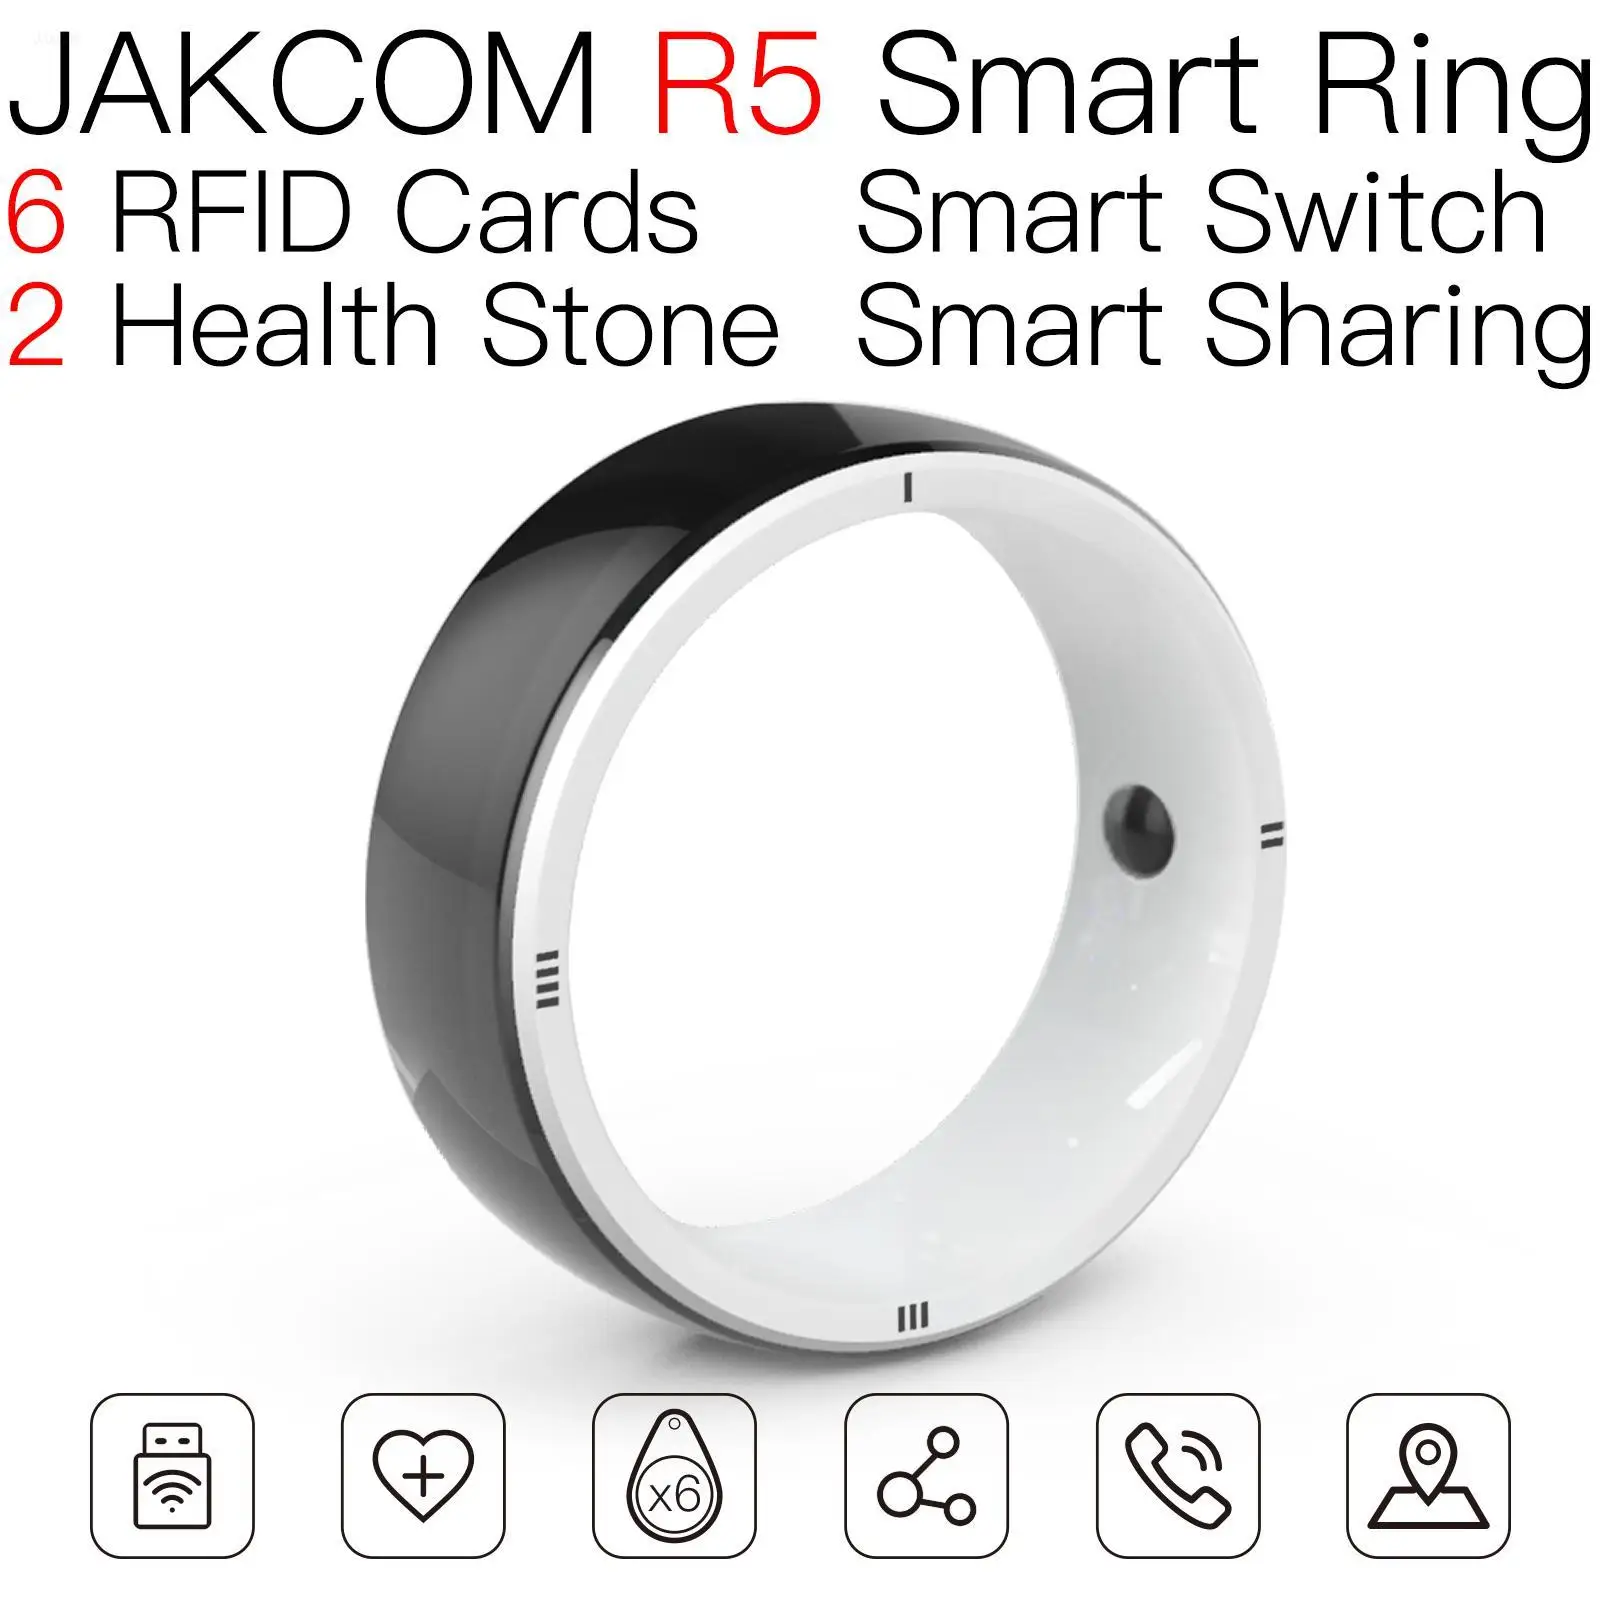 

JAKCOM R5 Smart Ring better than rfid rewritable 125 khz video card 8 gb business id pvc alien necklace nfc mini cards and